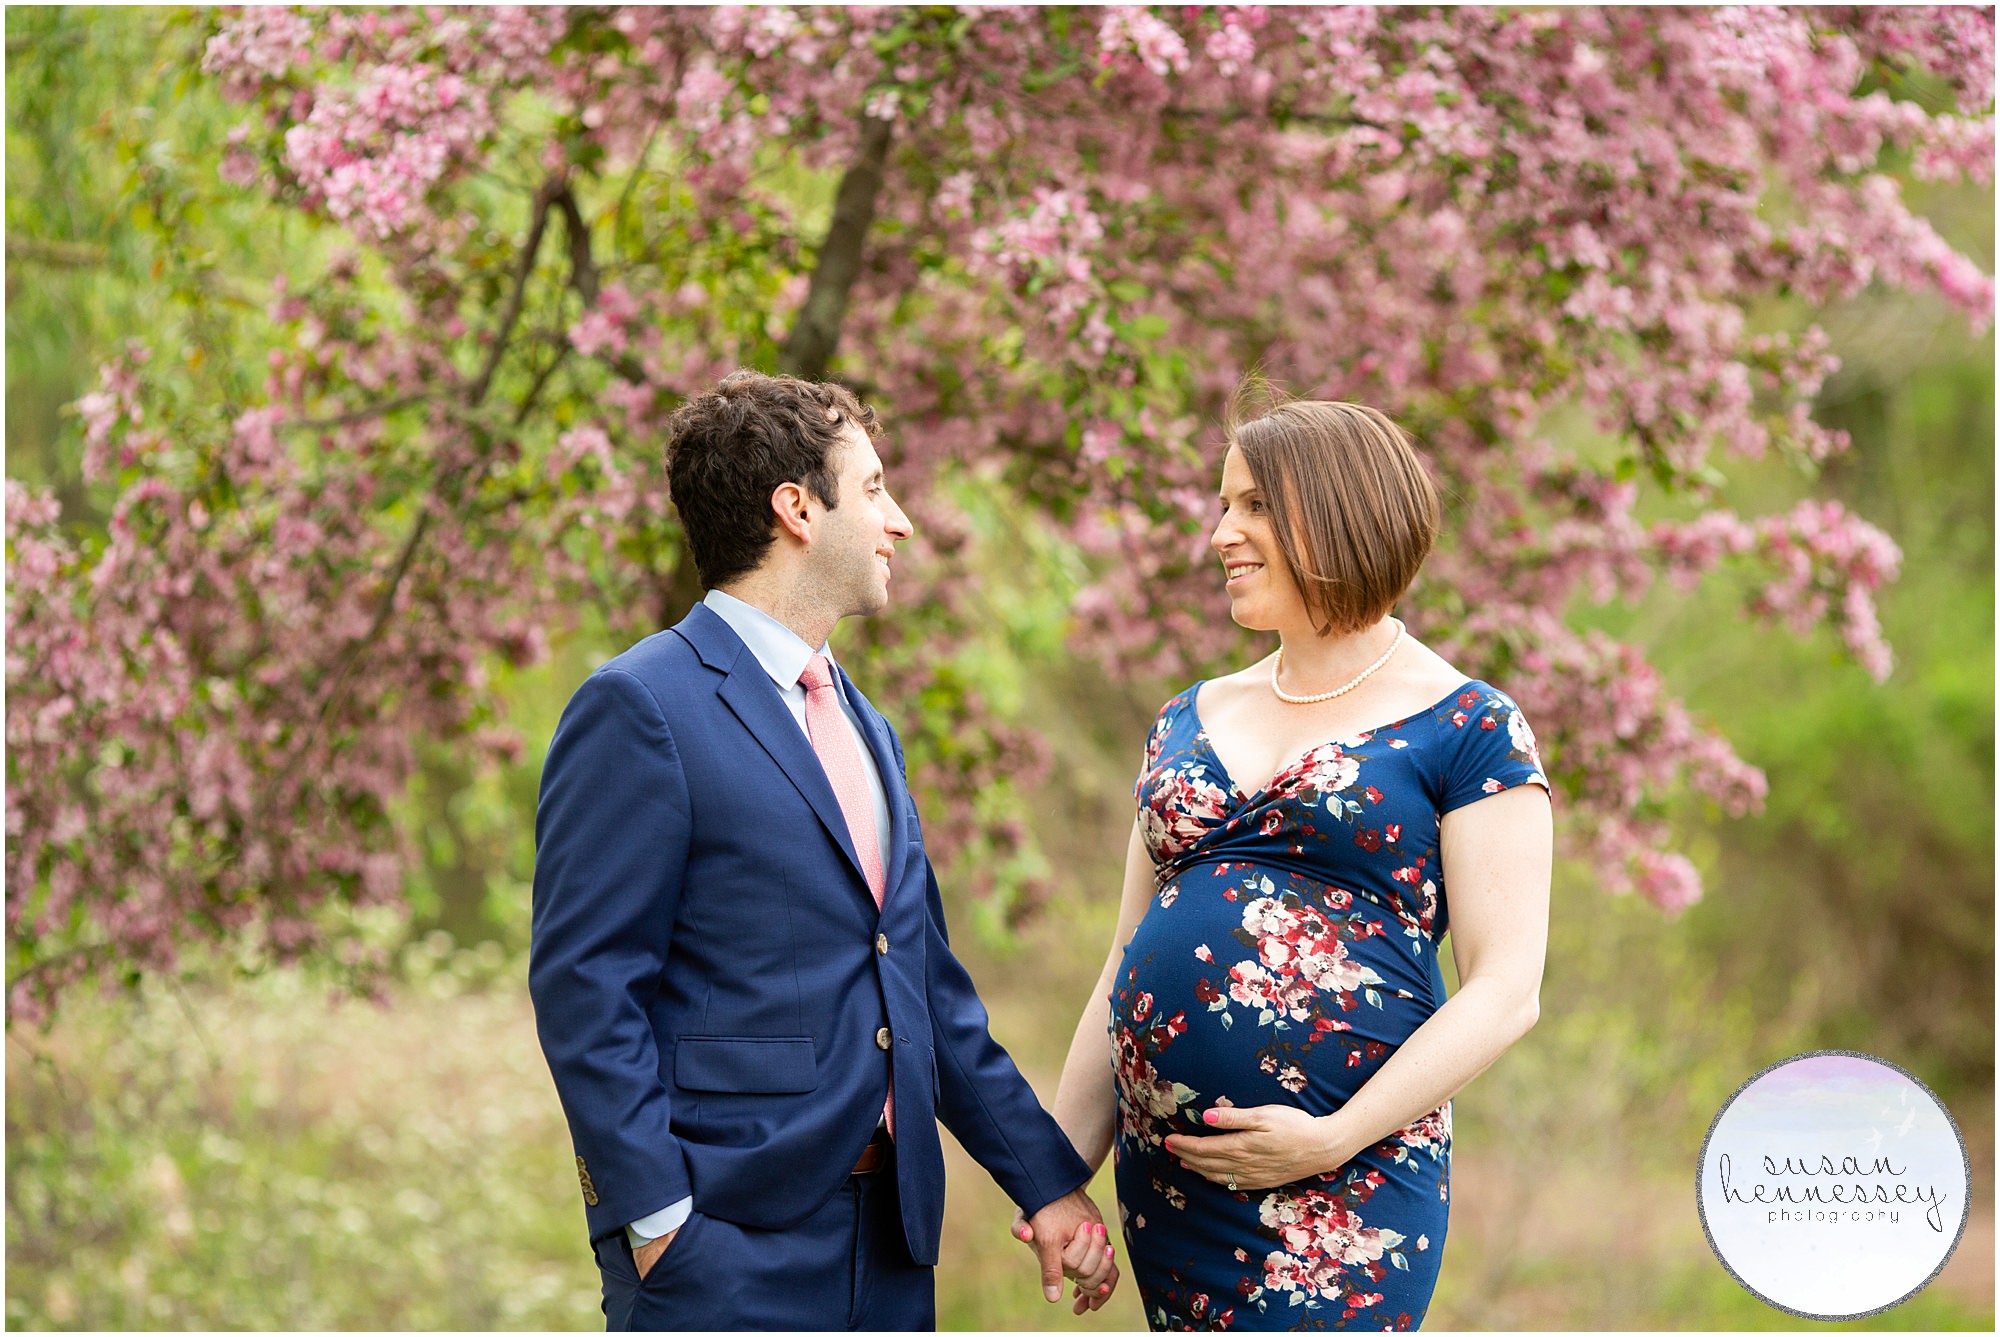 A spring cherry blossom maternity session in New Jersey